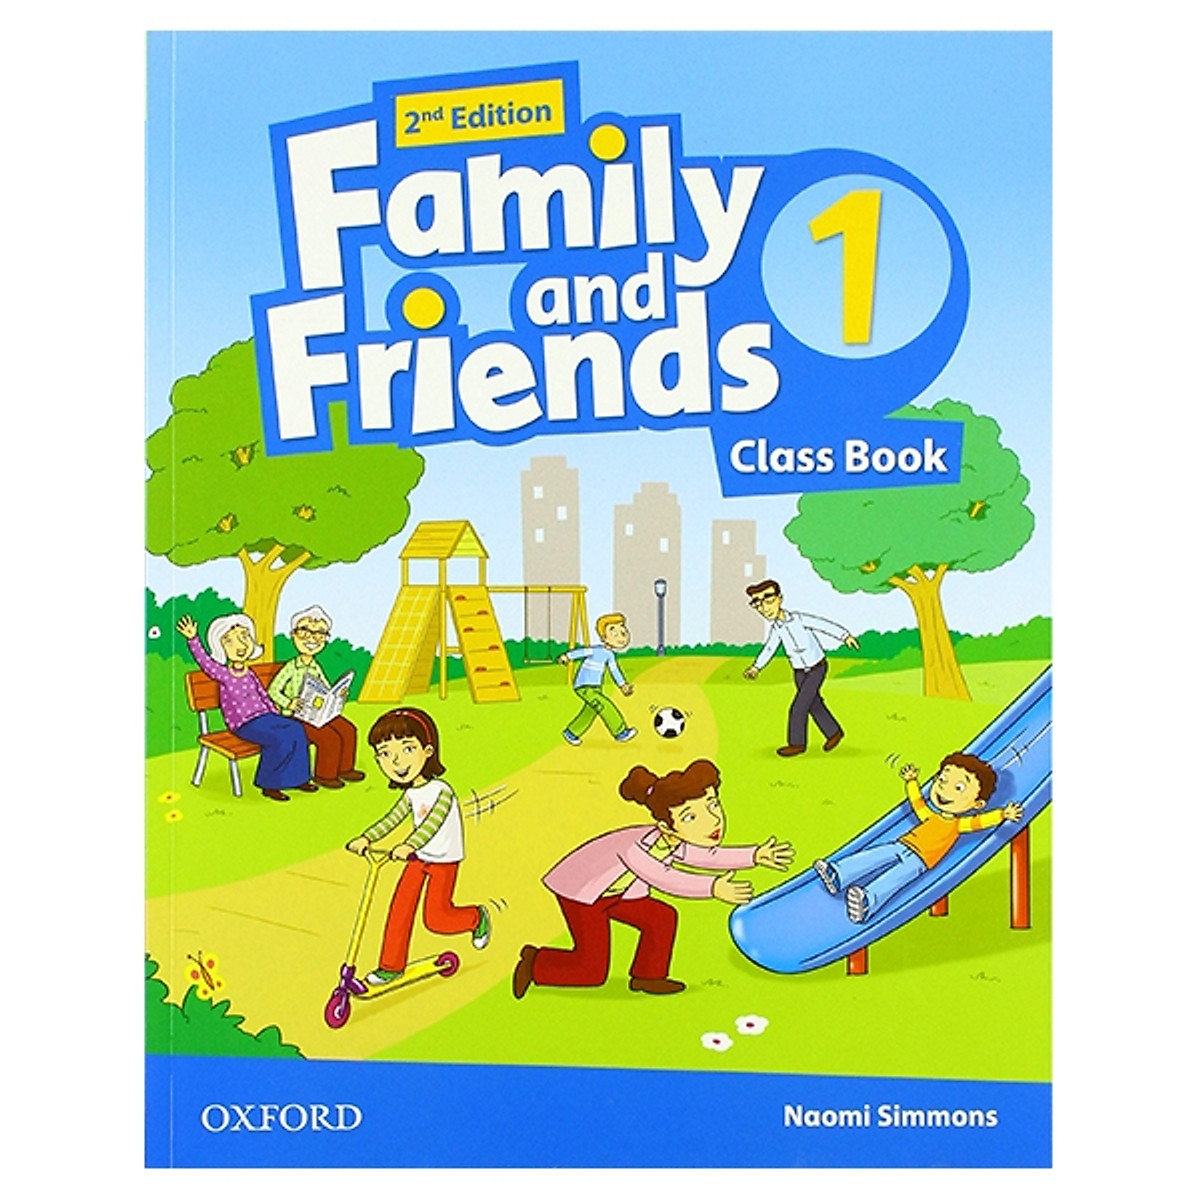 Family and friends 1 unit 12. Family and friends 1 class book. Фэмили энд френдс. Фэмили энд френдс 1. Family and friends 1 2.